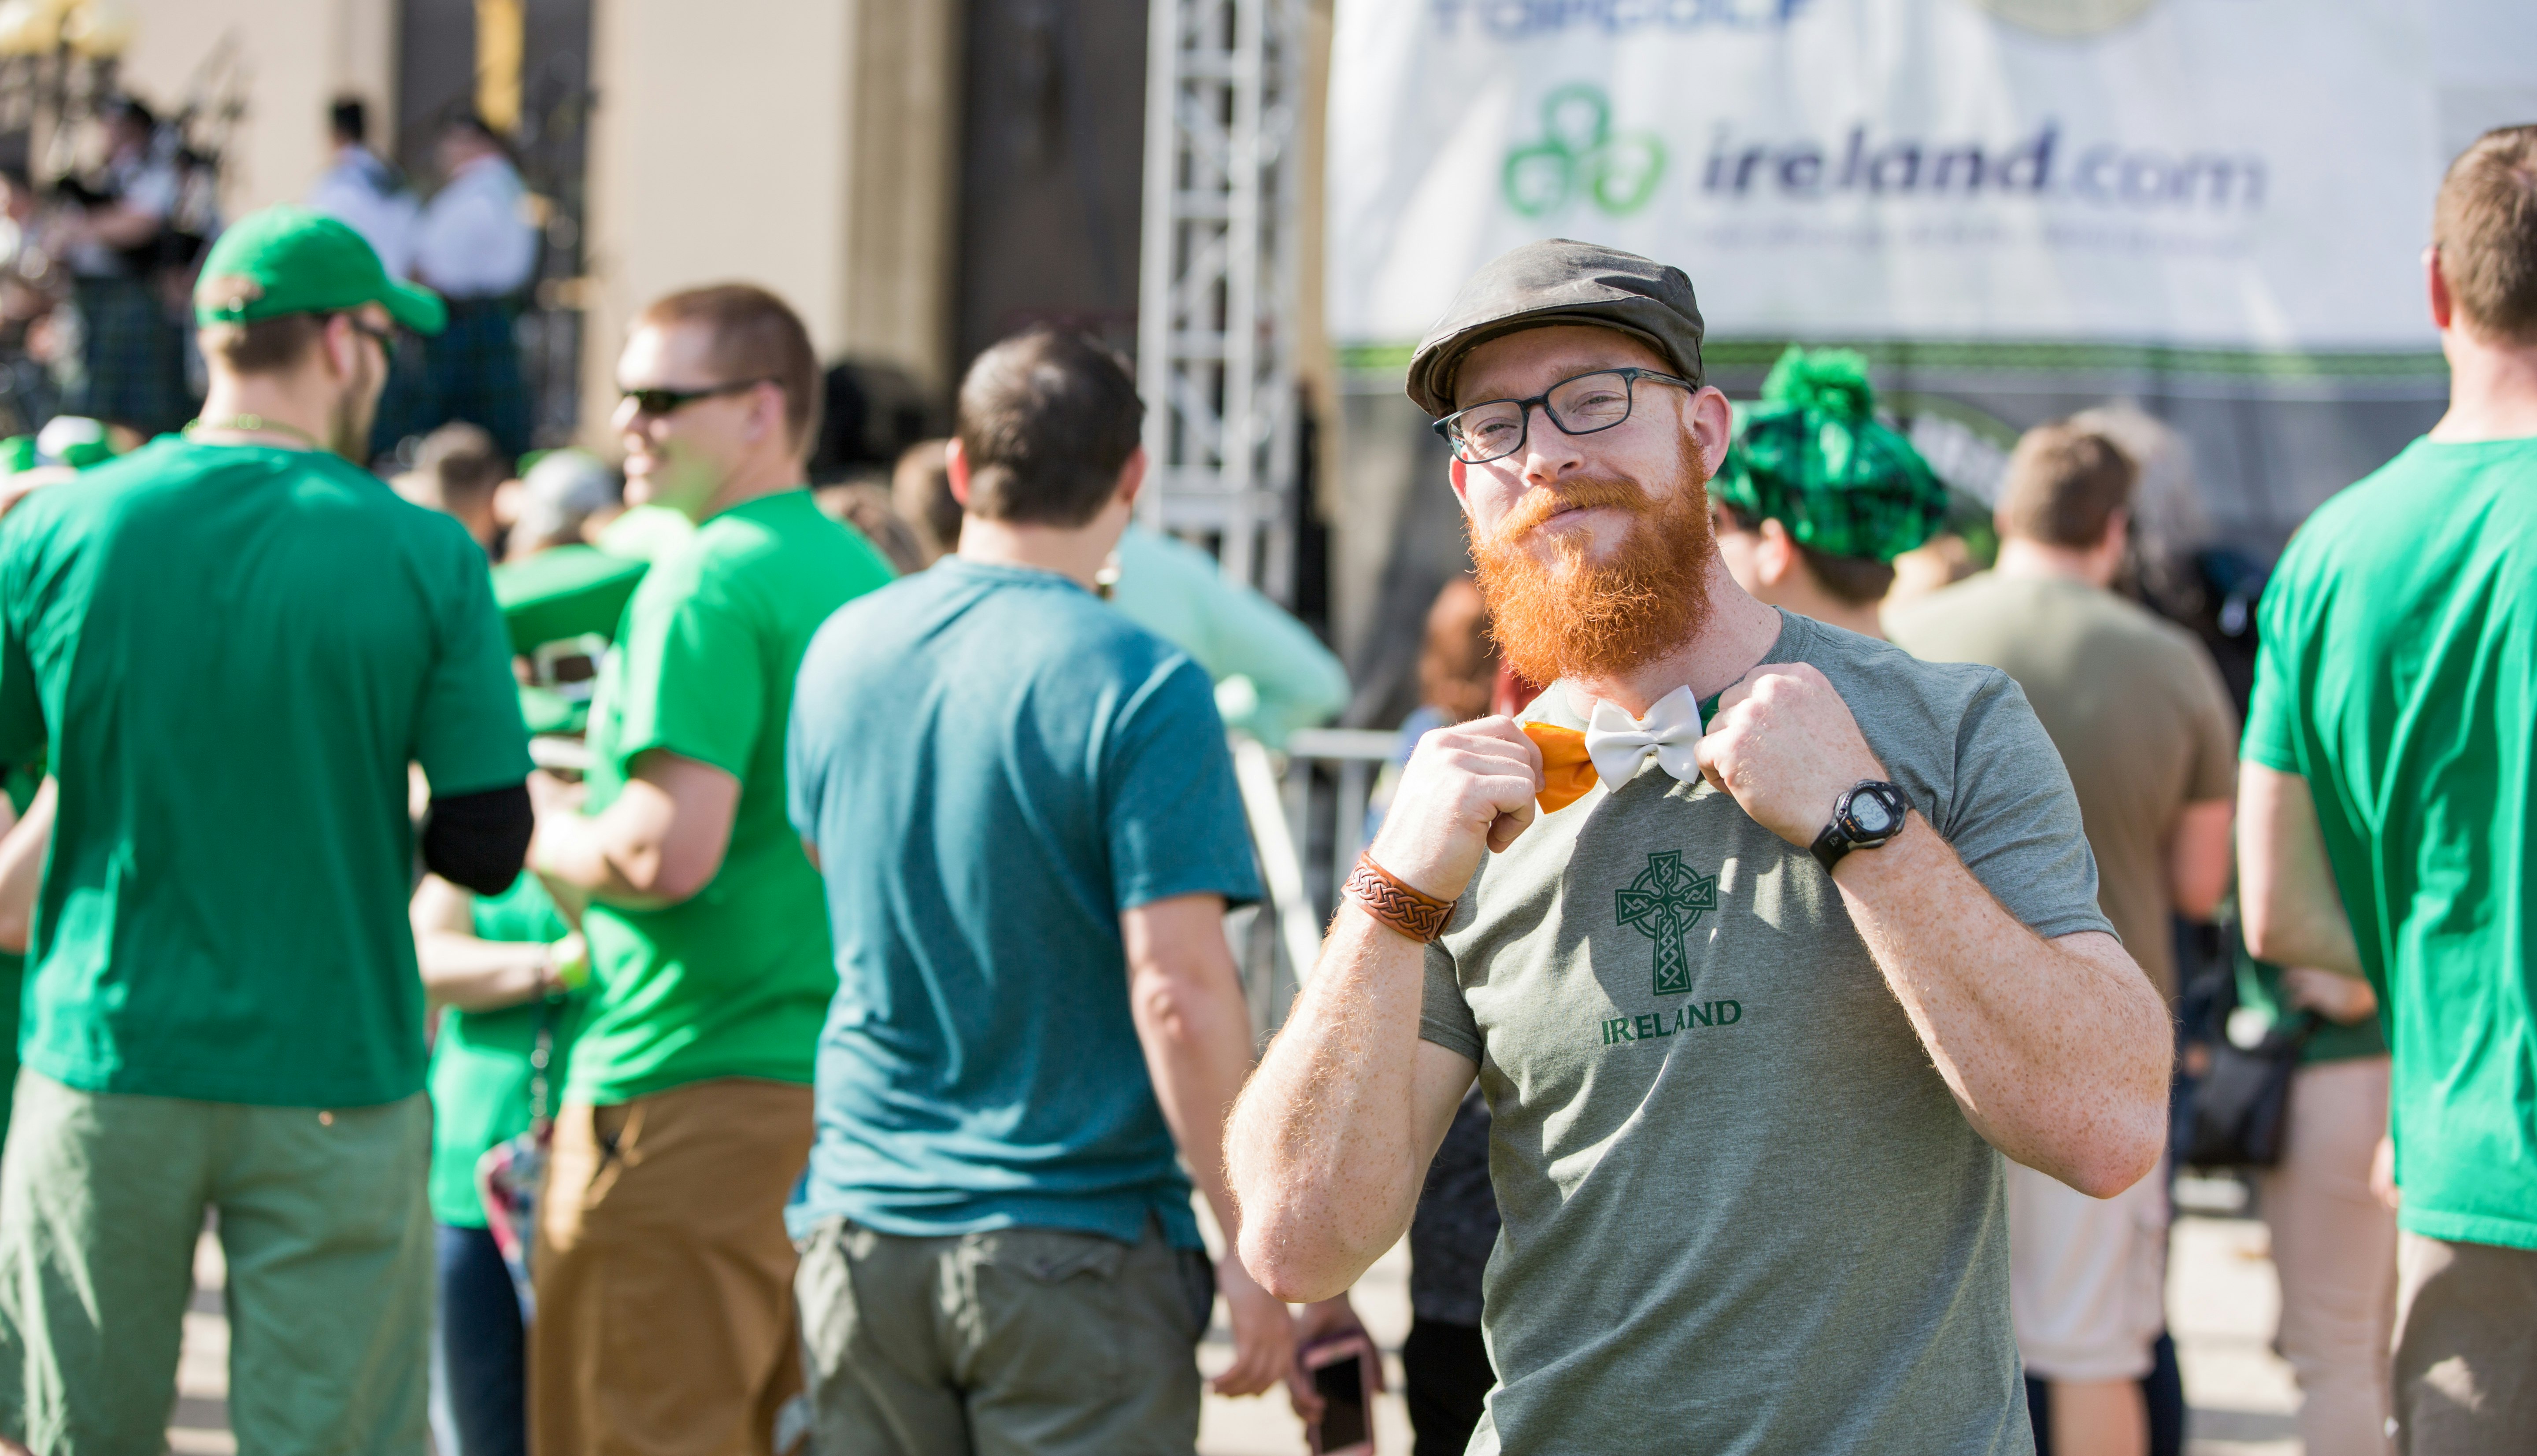 A man with a red beard takes part in St Patrick's Day celebrations in Nashville